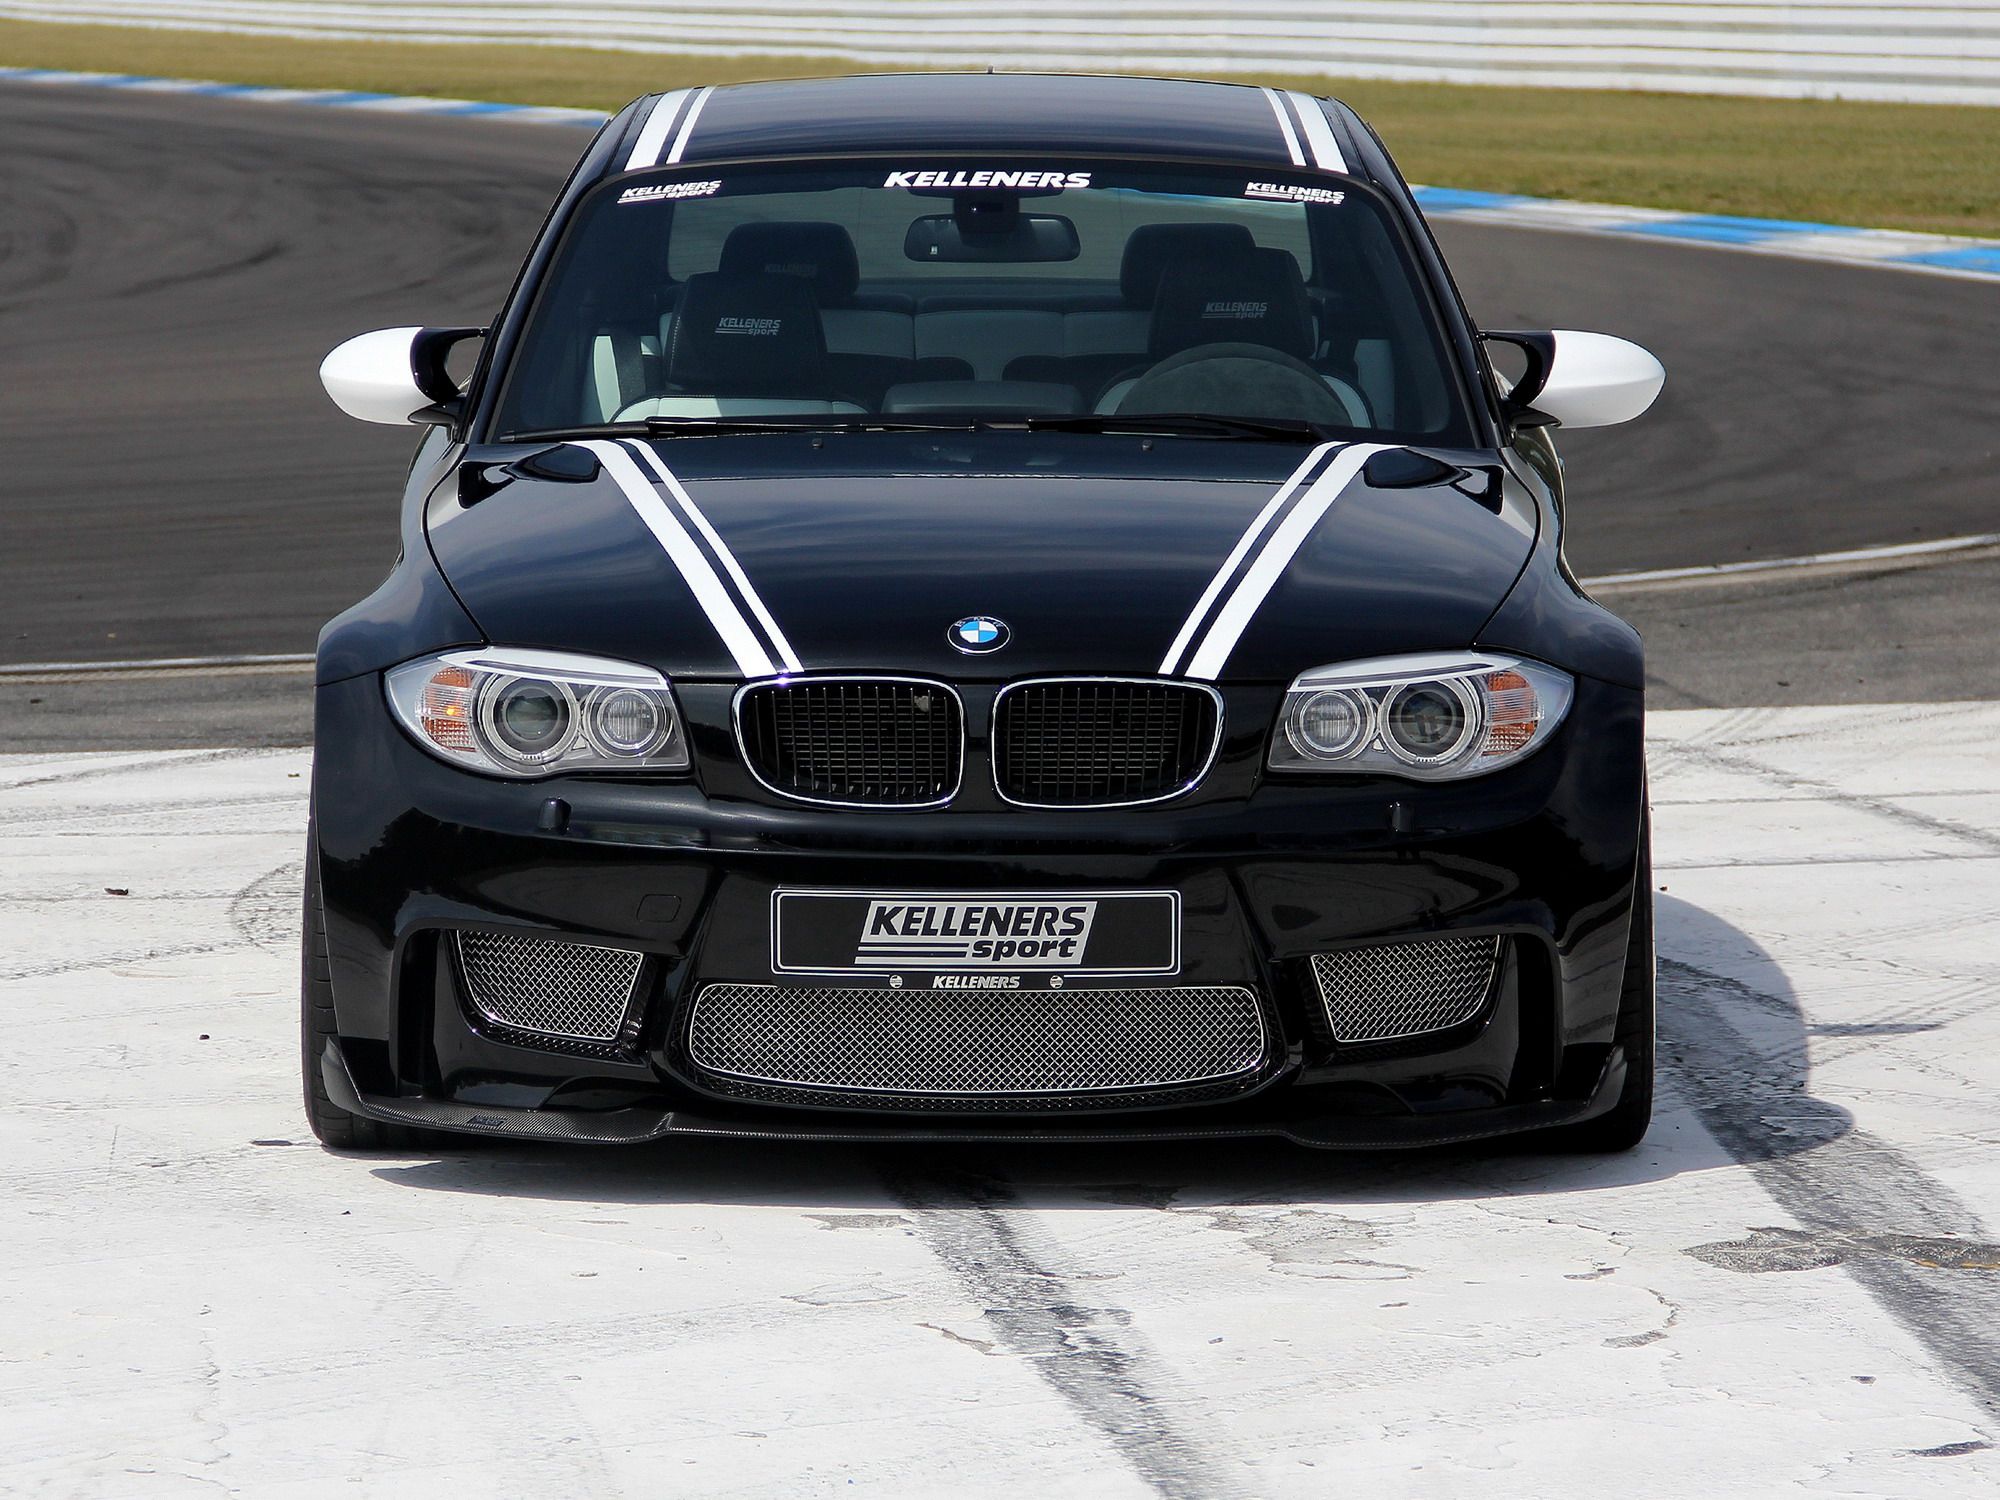 2012 BMW 1-Series M Coupe by Kelleners Sport 